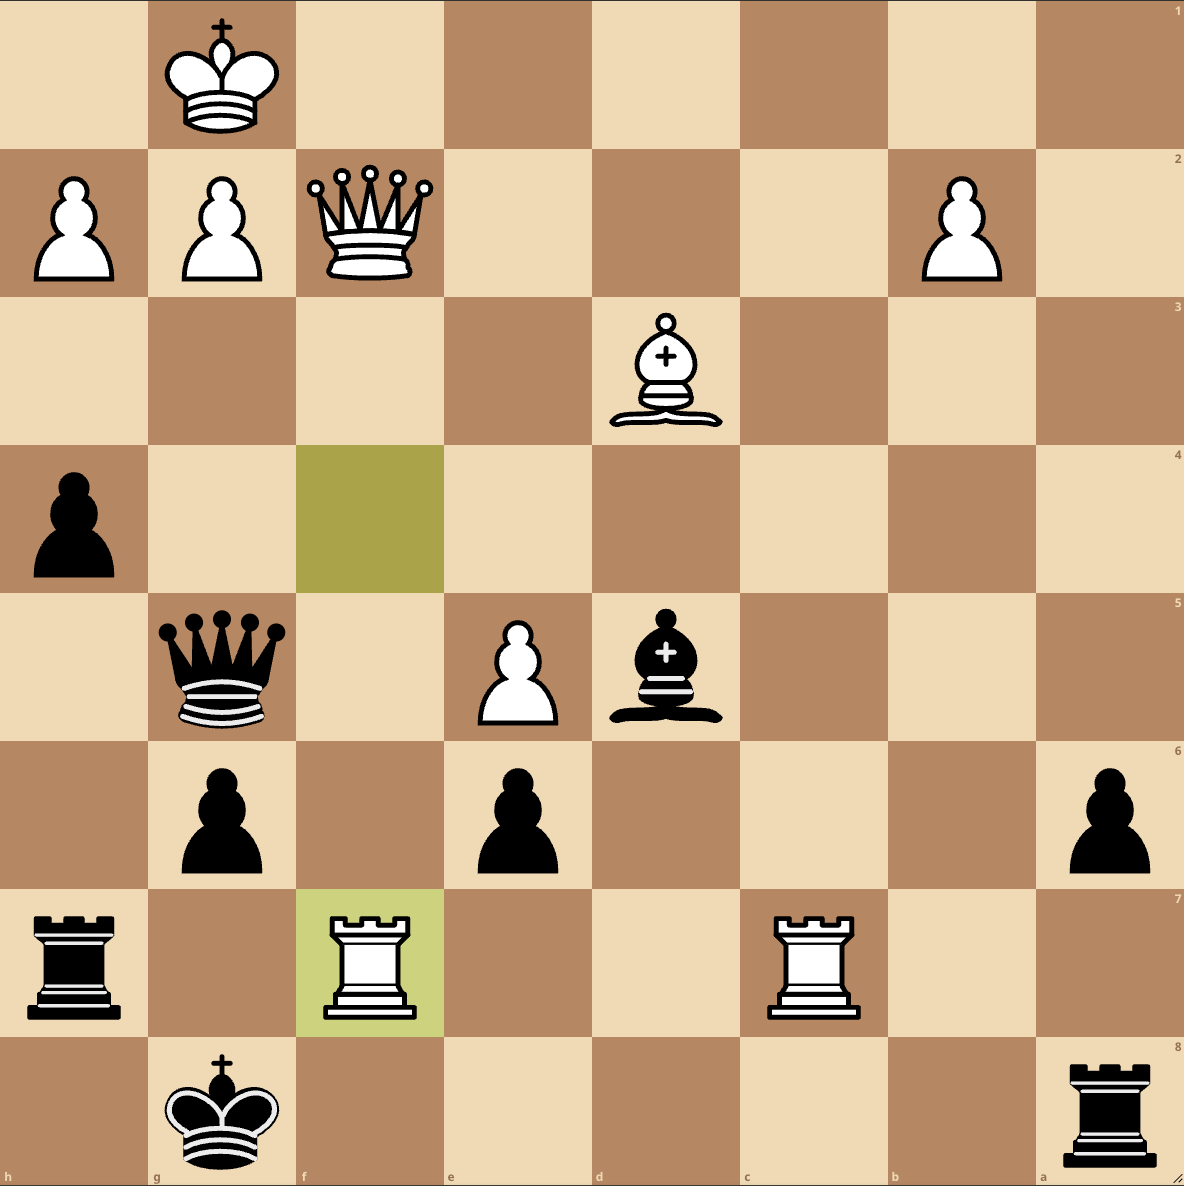 Can someone explain whites next move (Kh2) to me? : r/chess